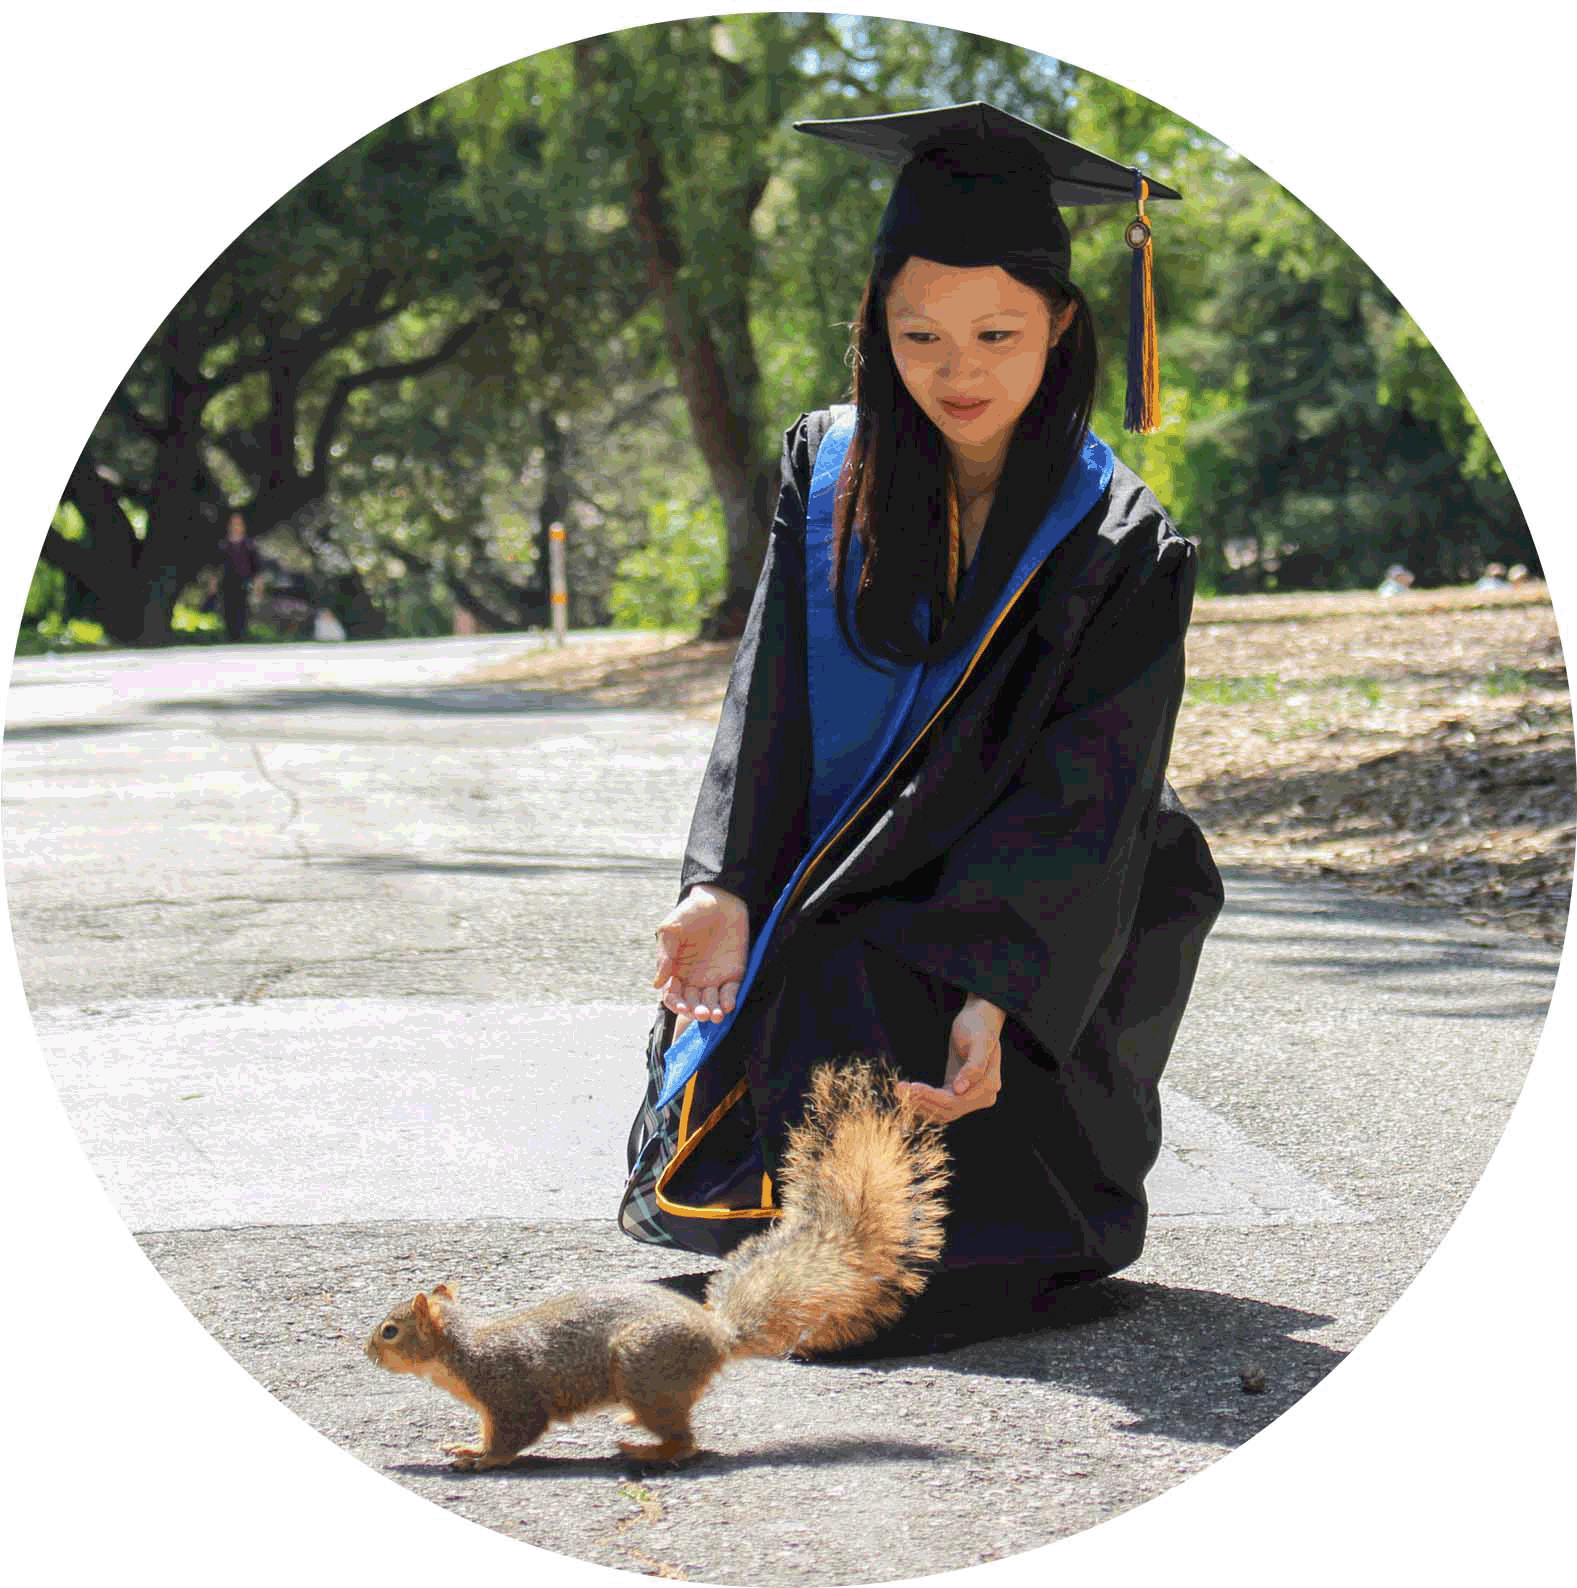 Graduation Day with a squirrel